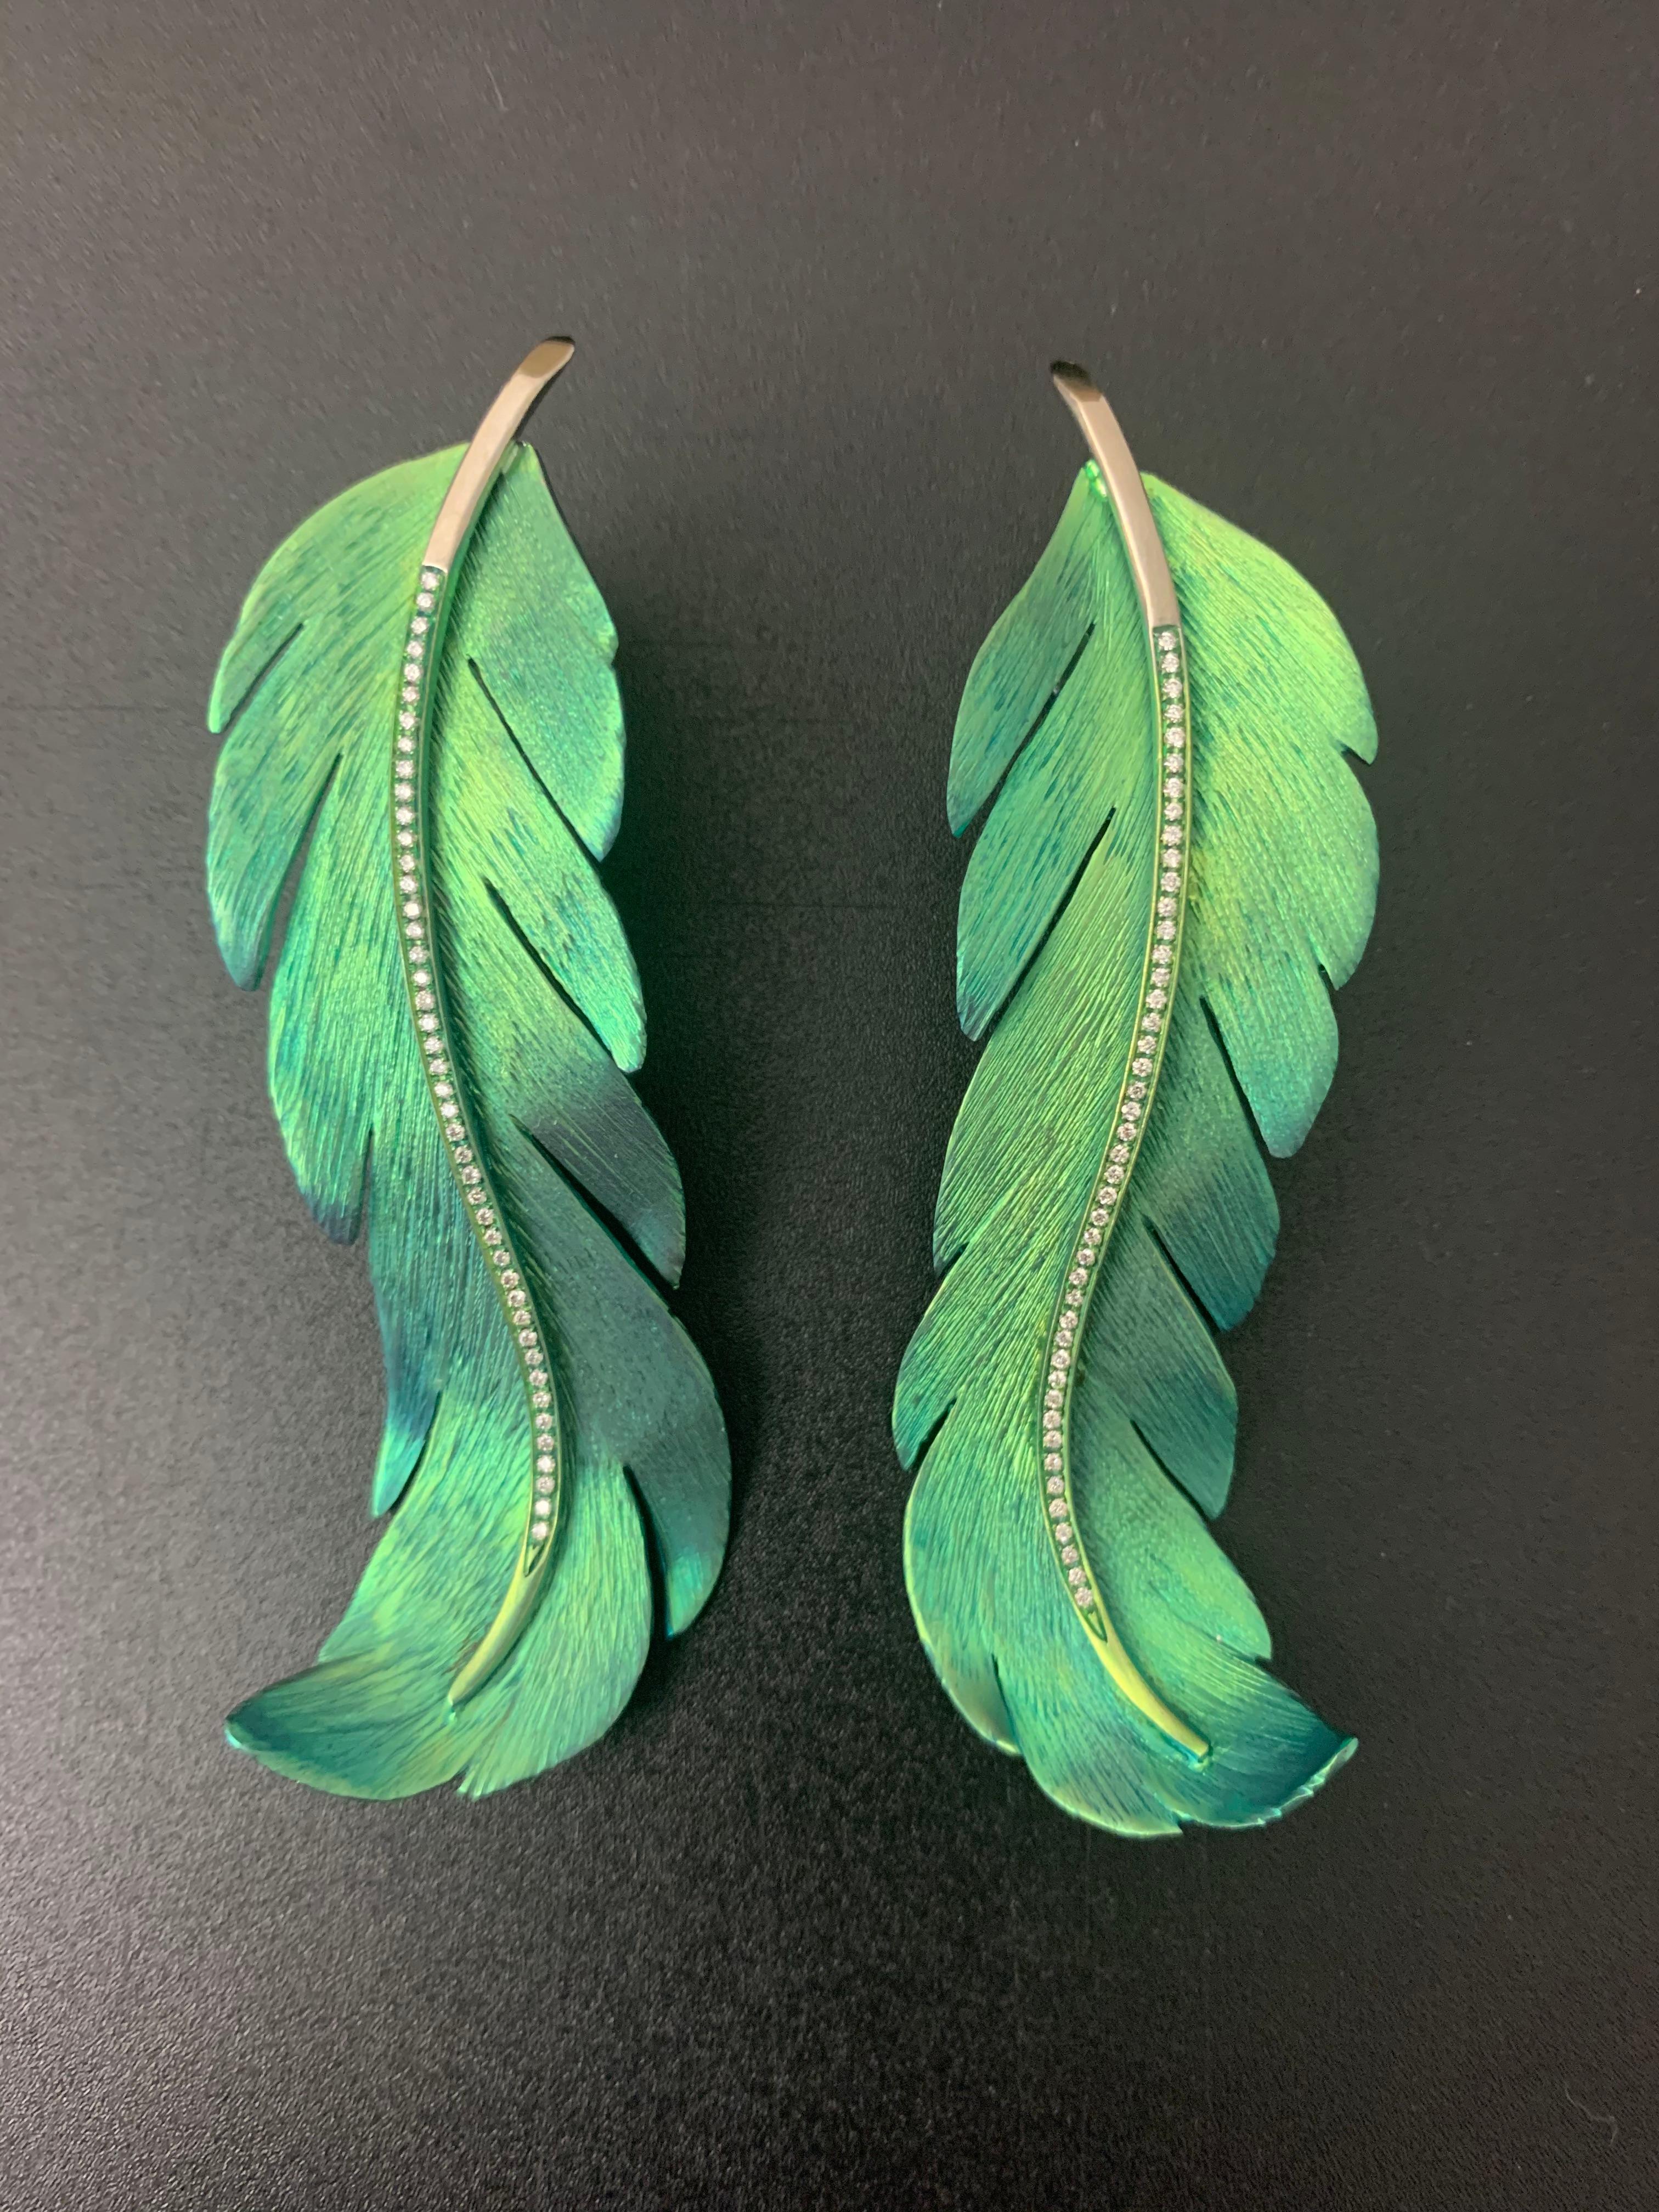 Titanium and diamonds Earrings feather

Earrings feather titanium and gold 3.65 gr
88 diamonds brilliant cut 0.33 Cts 
These earrings are perfect with casual outfit and special evening.
Their color brings light and hapiness.
On request : Custom-made